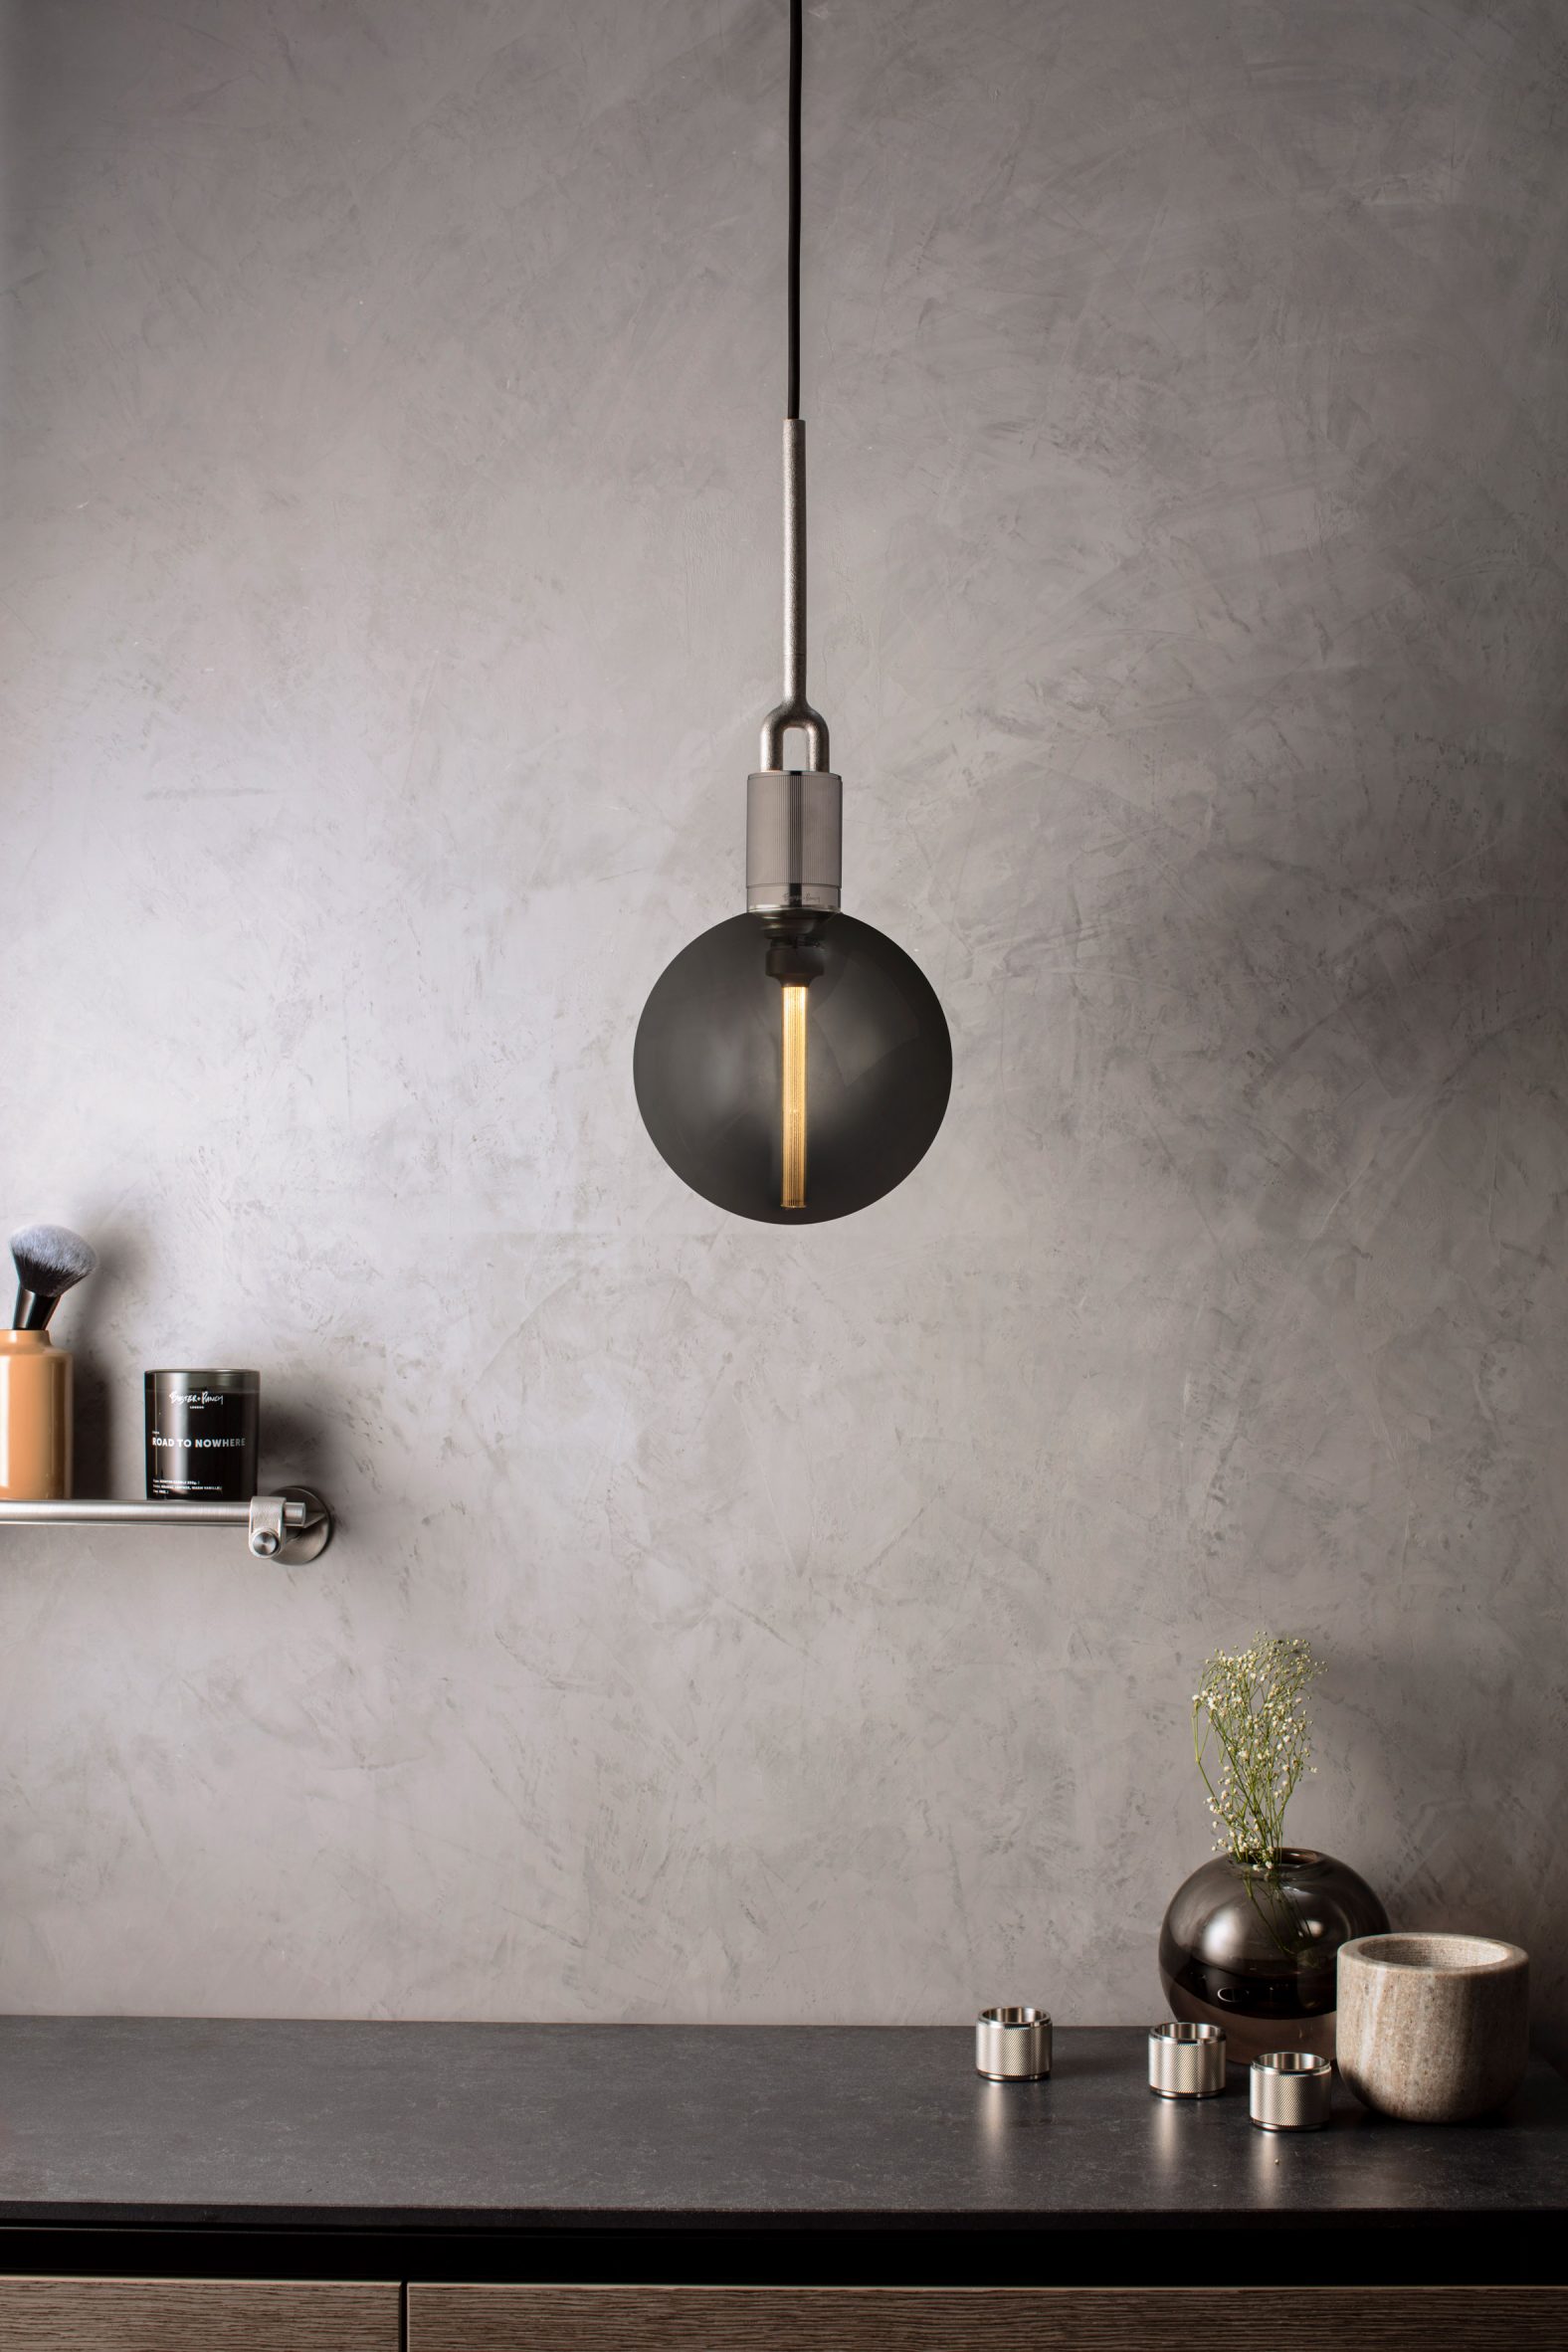 Forked lighting by Massimo Minale for Buster and Punch